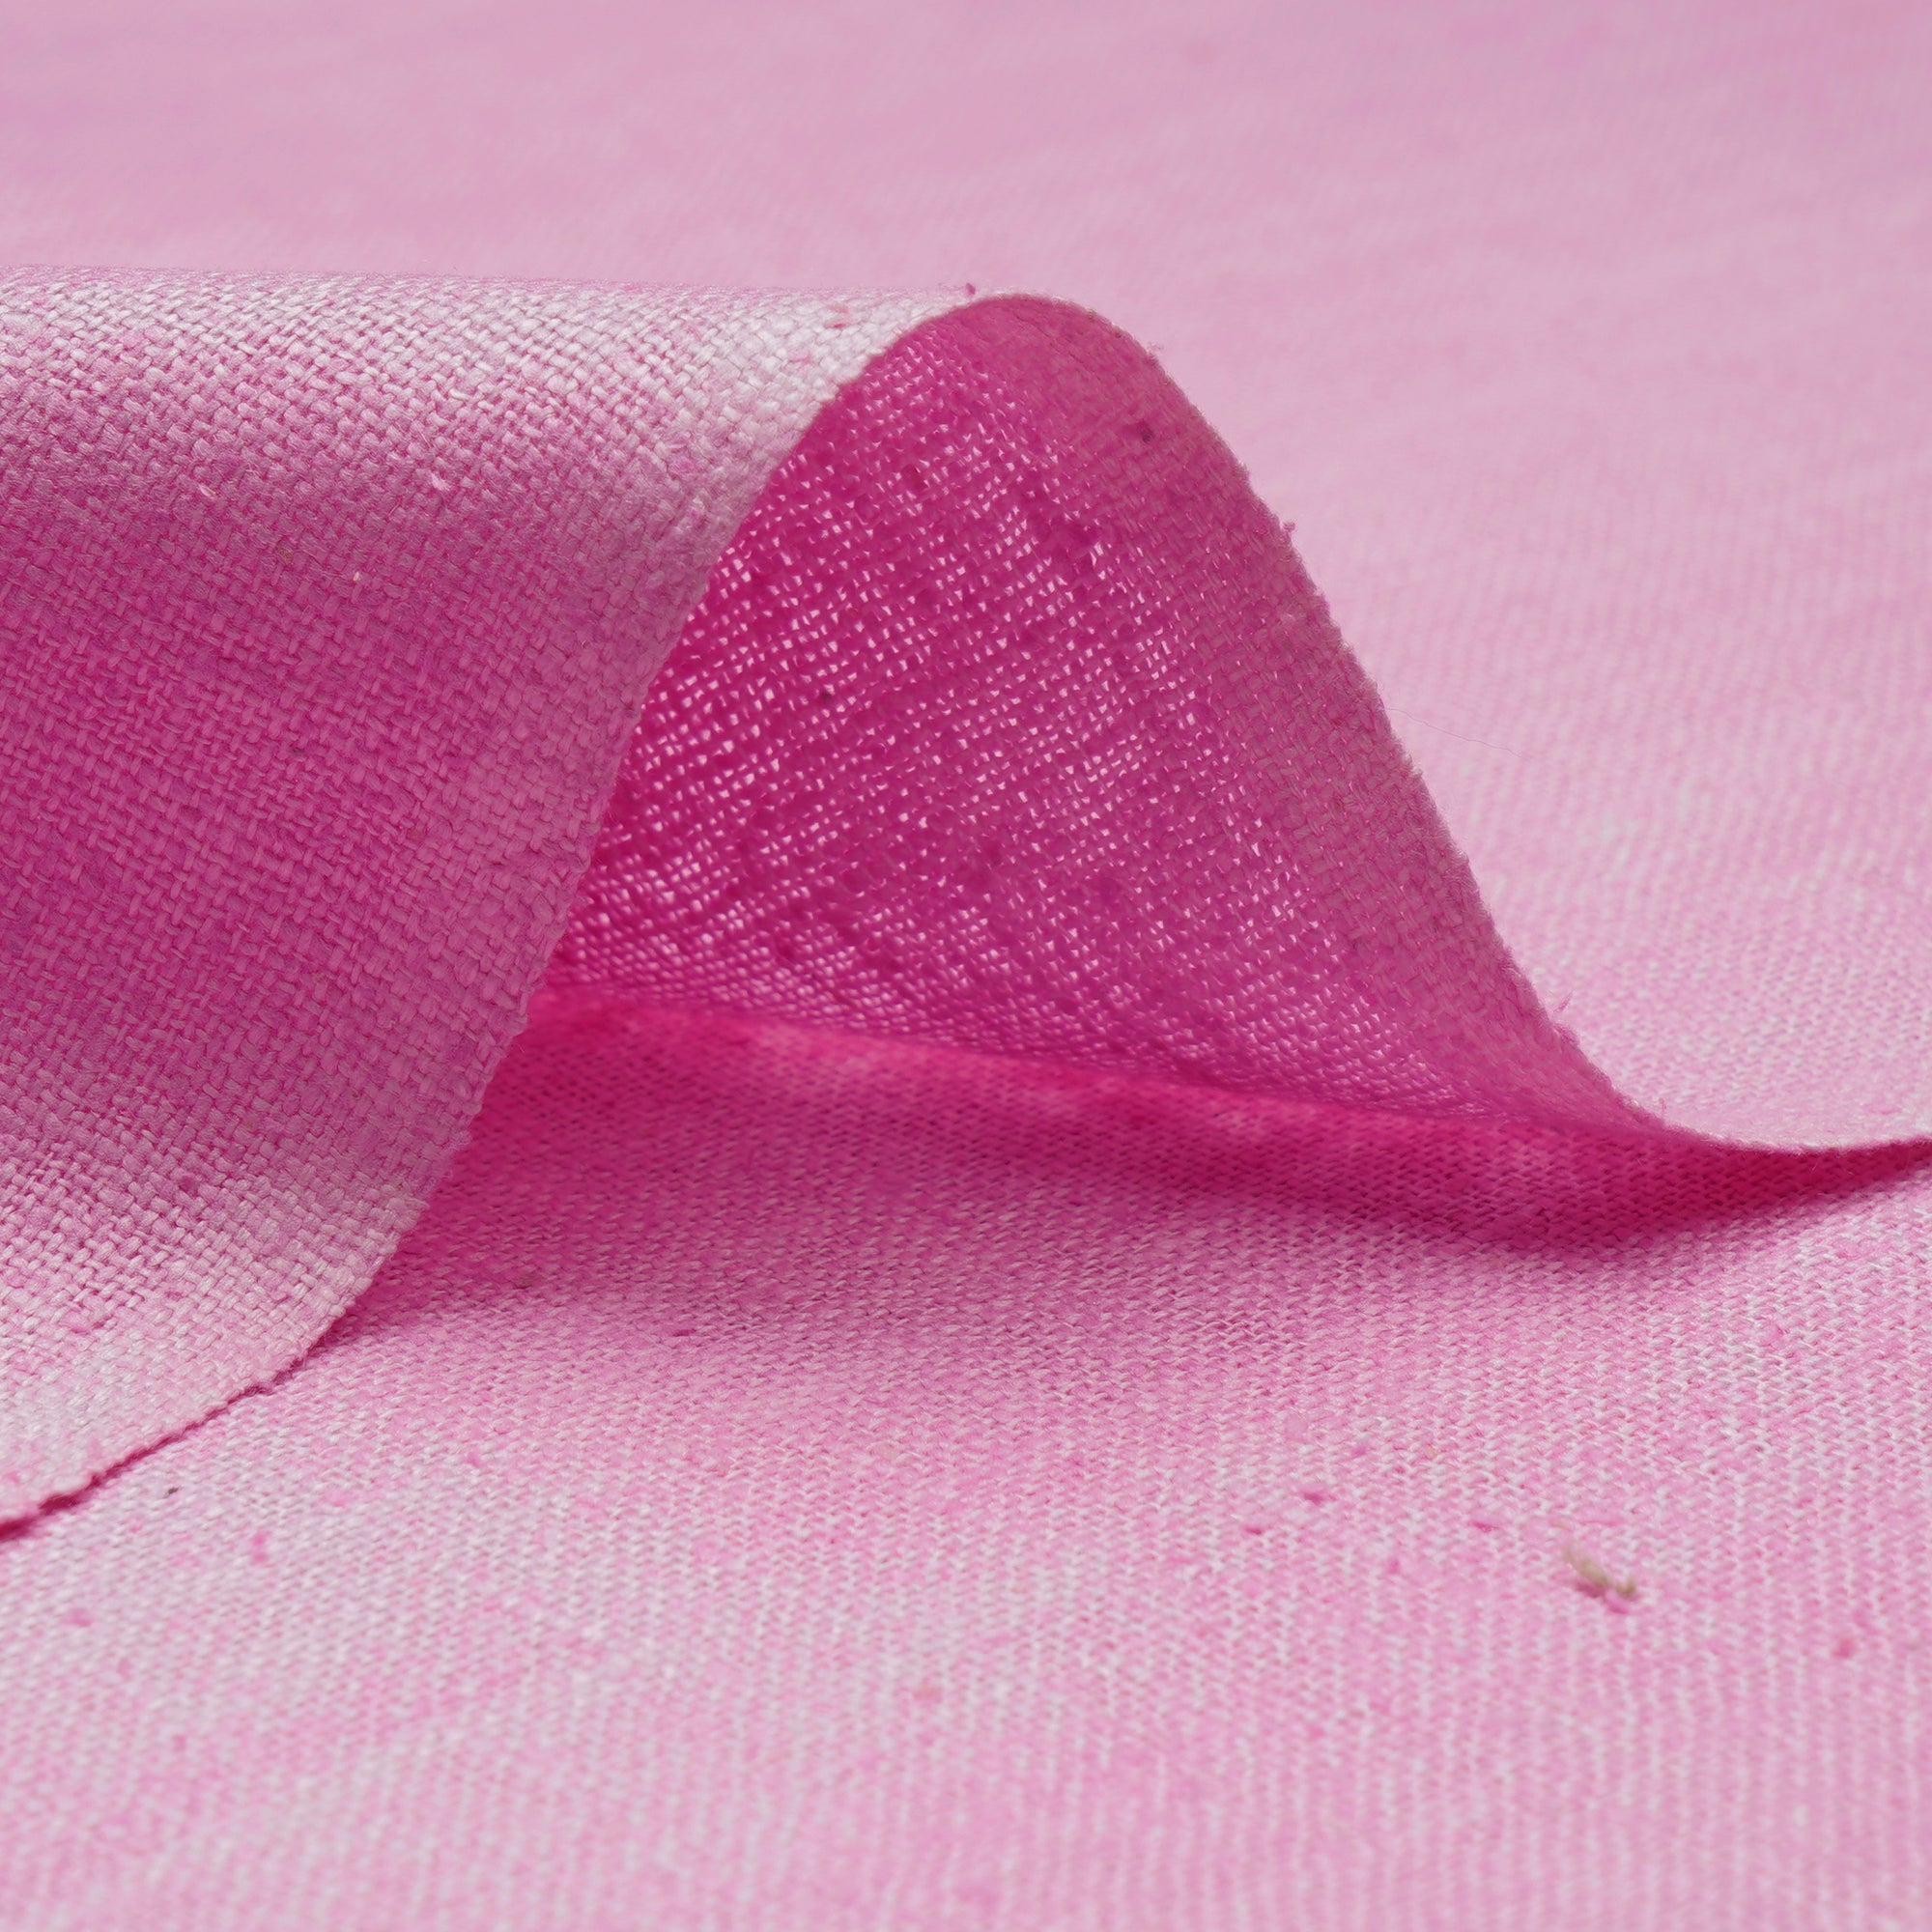 Ultra Pink Color Matka Noile Silk Fabric